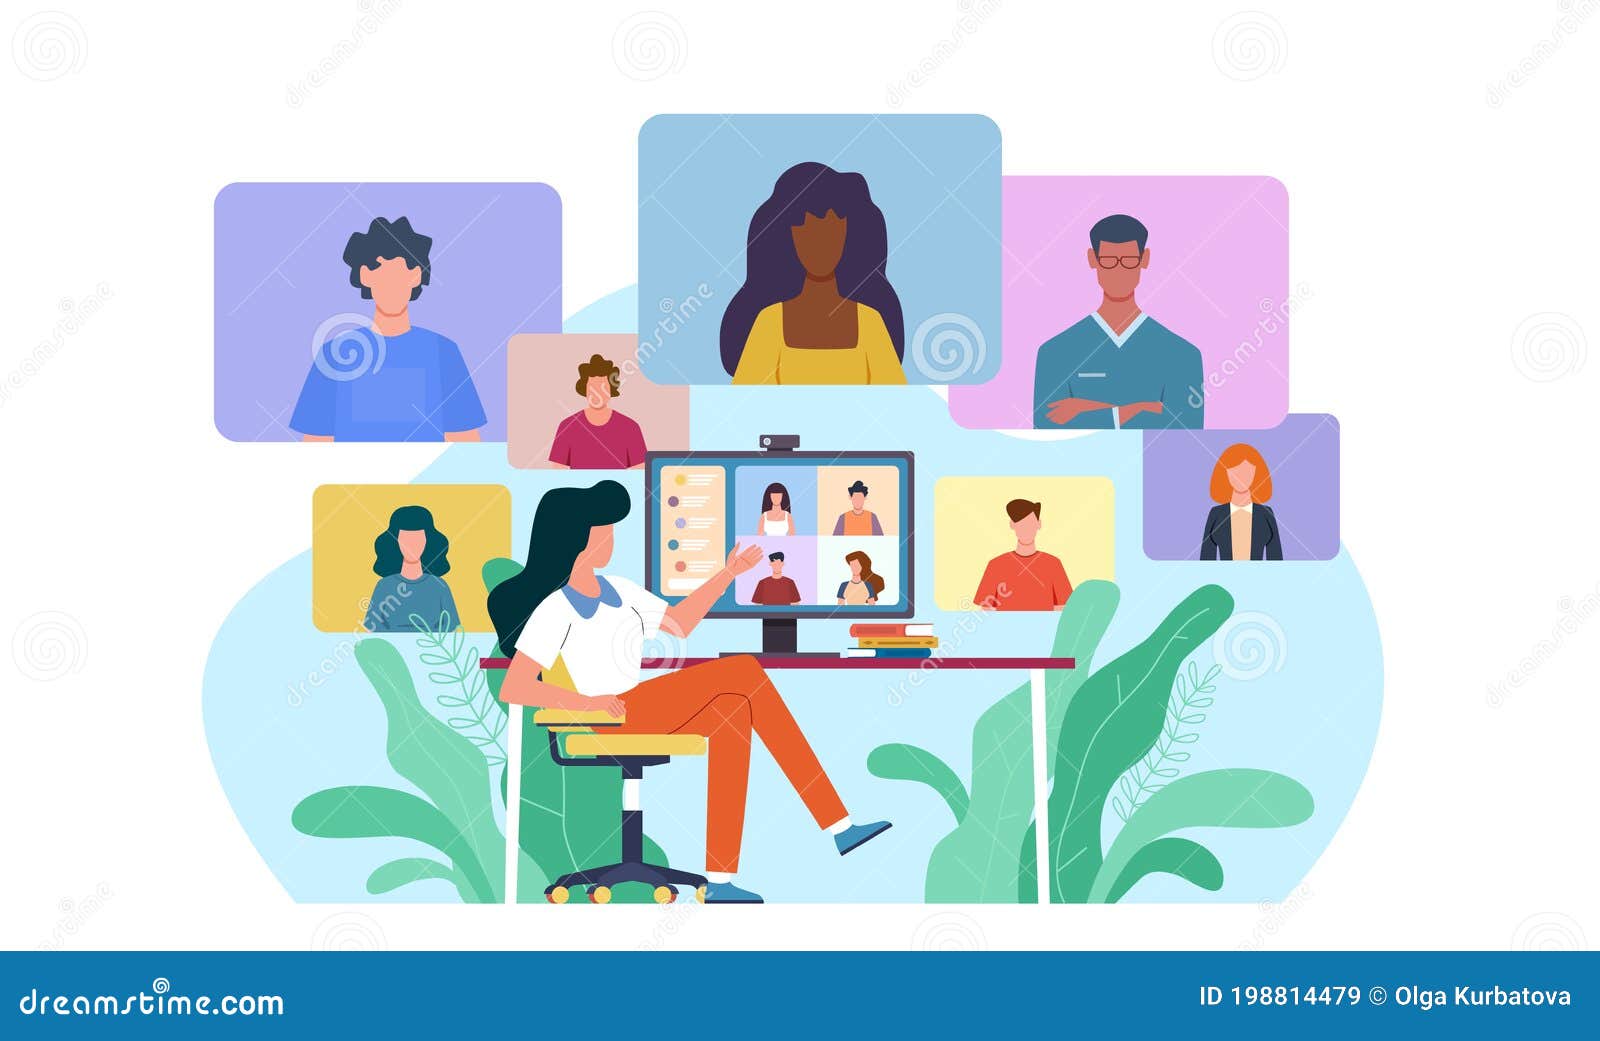 video conference. woman at desk provides collective virtual chat. online business meeting working team webinar with